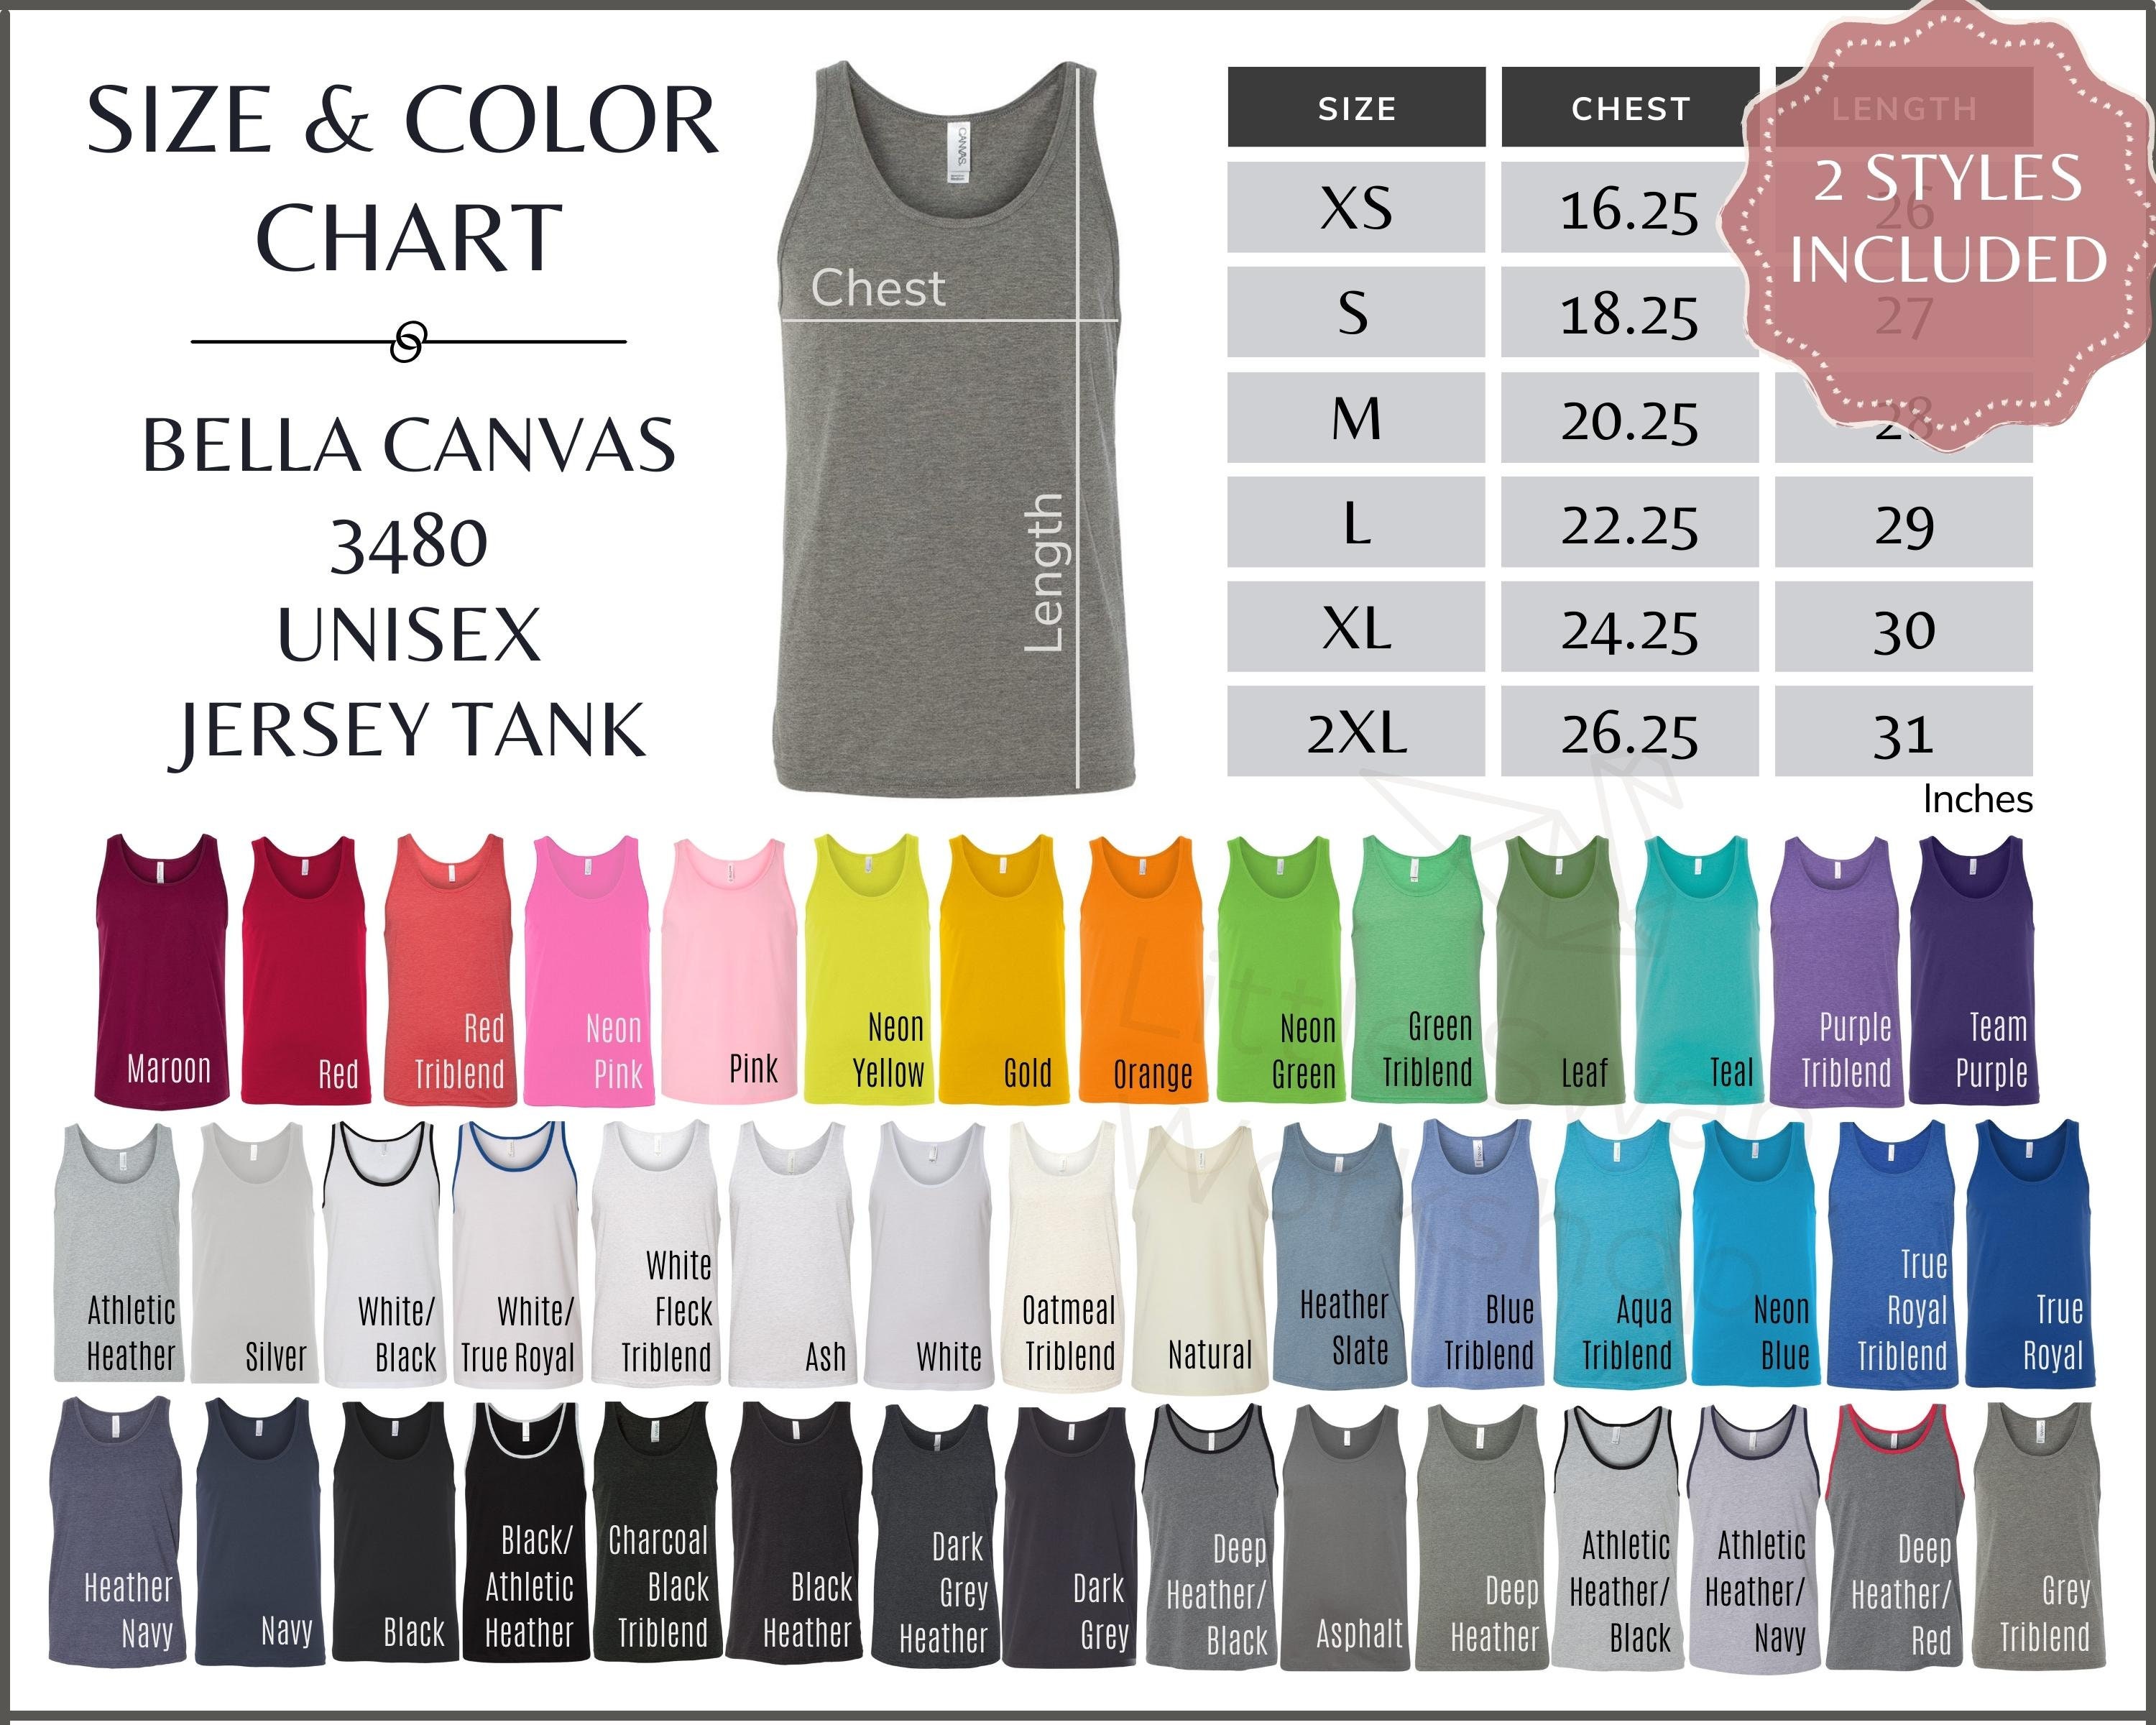 Bella Canvas 3480 Color Chart, 3480 Unisex Tank Size and Color Guide ...